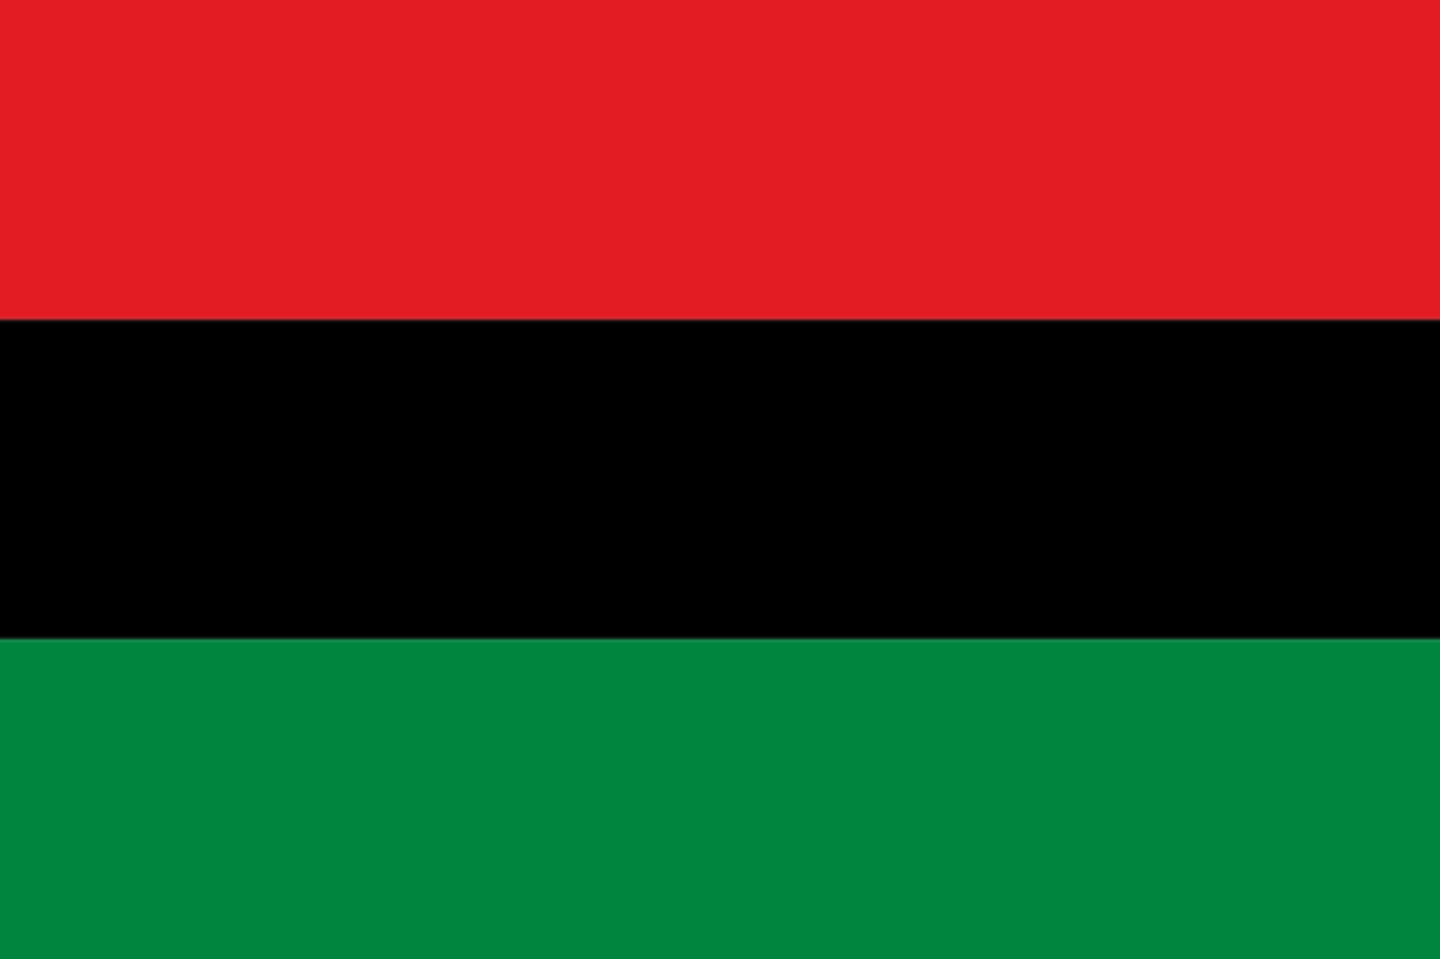 <p>- By Marcus Garvey (1920)<br>- Served as unifying symbol to connect people of African descent</p>